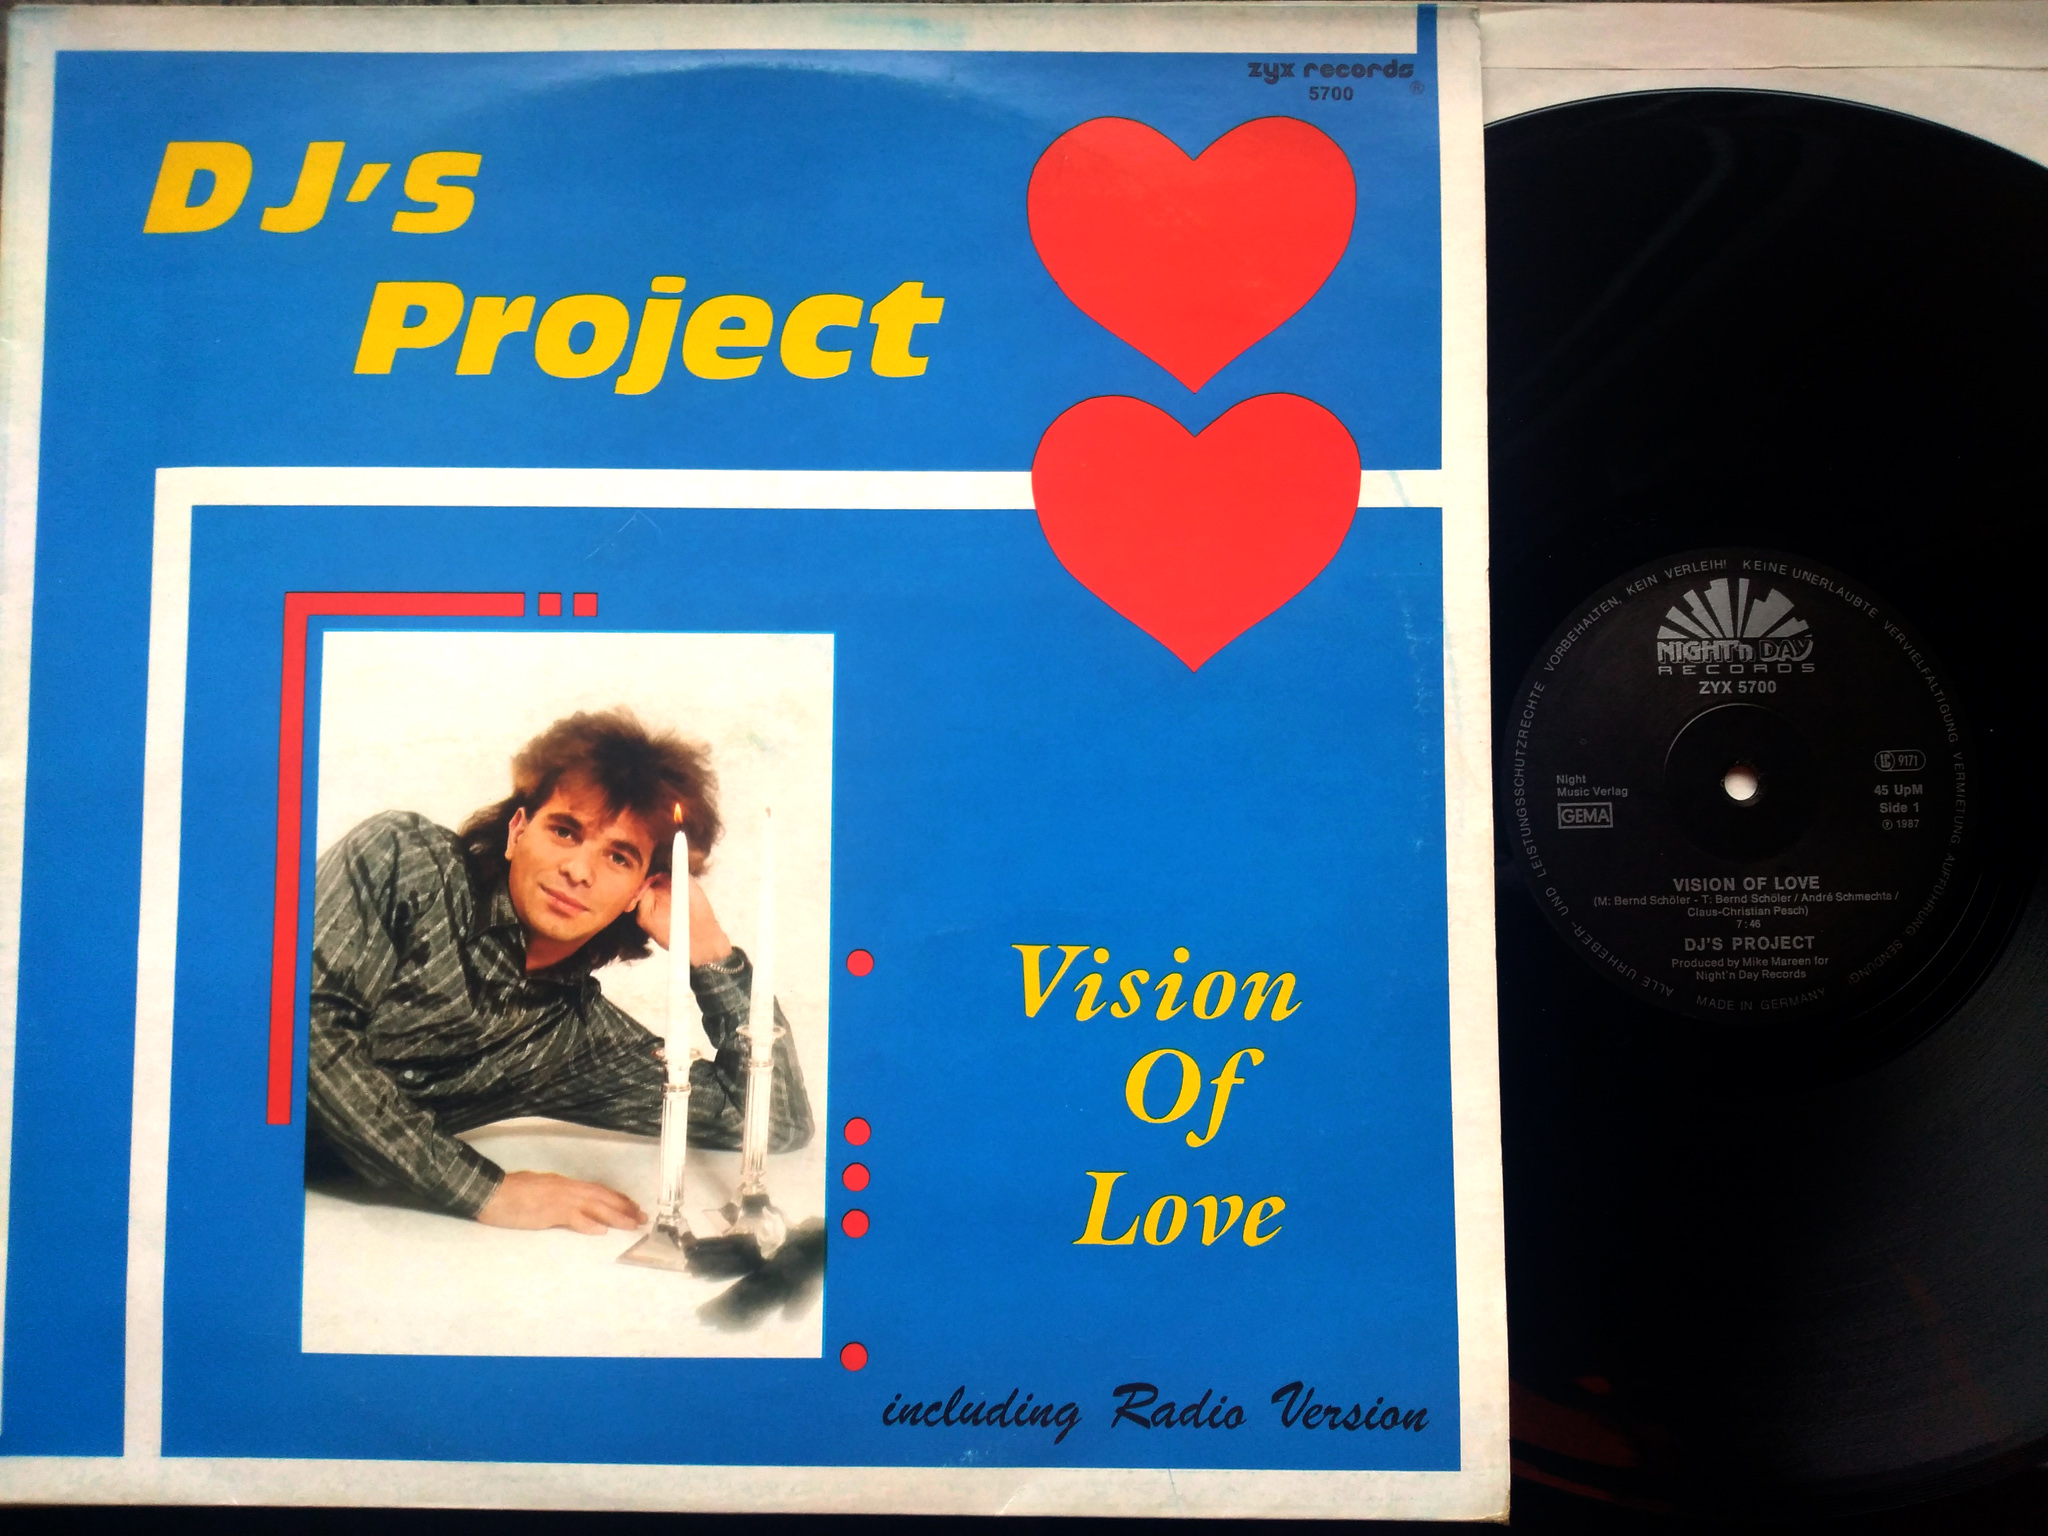 DJ's Project - Vision Of Love